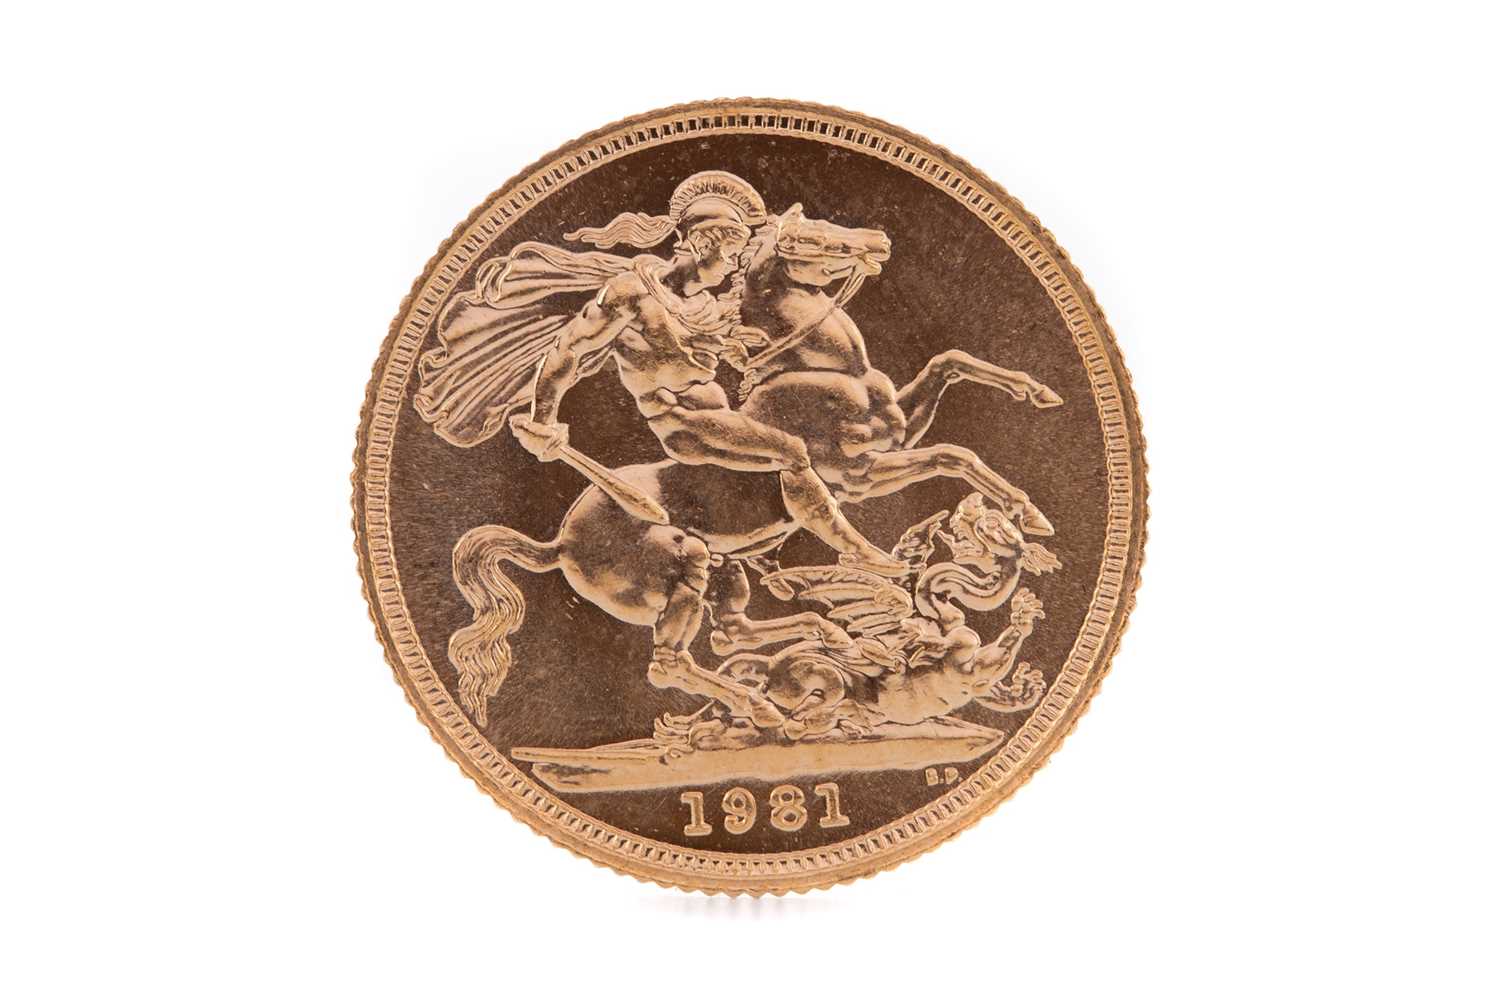 Lot 87 - AN ELIZABETH II GOLD SOVEREIGN DATED 1981